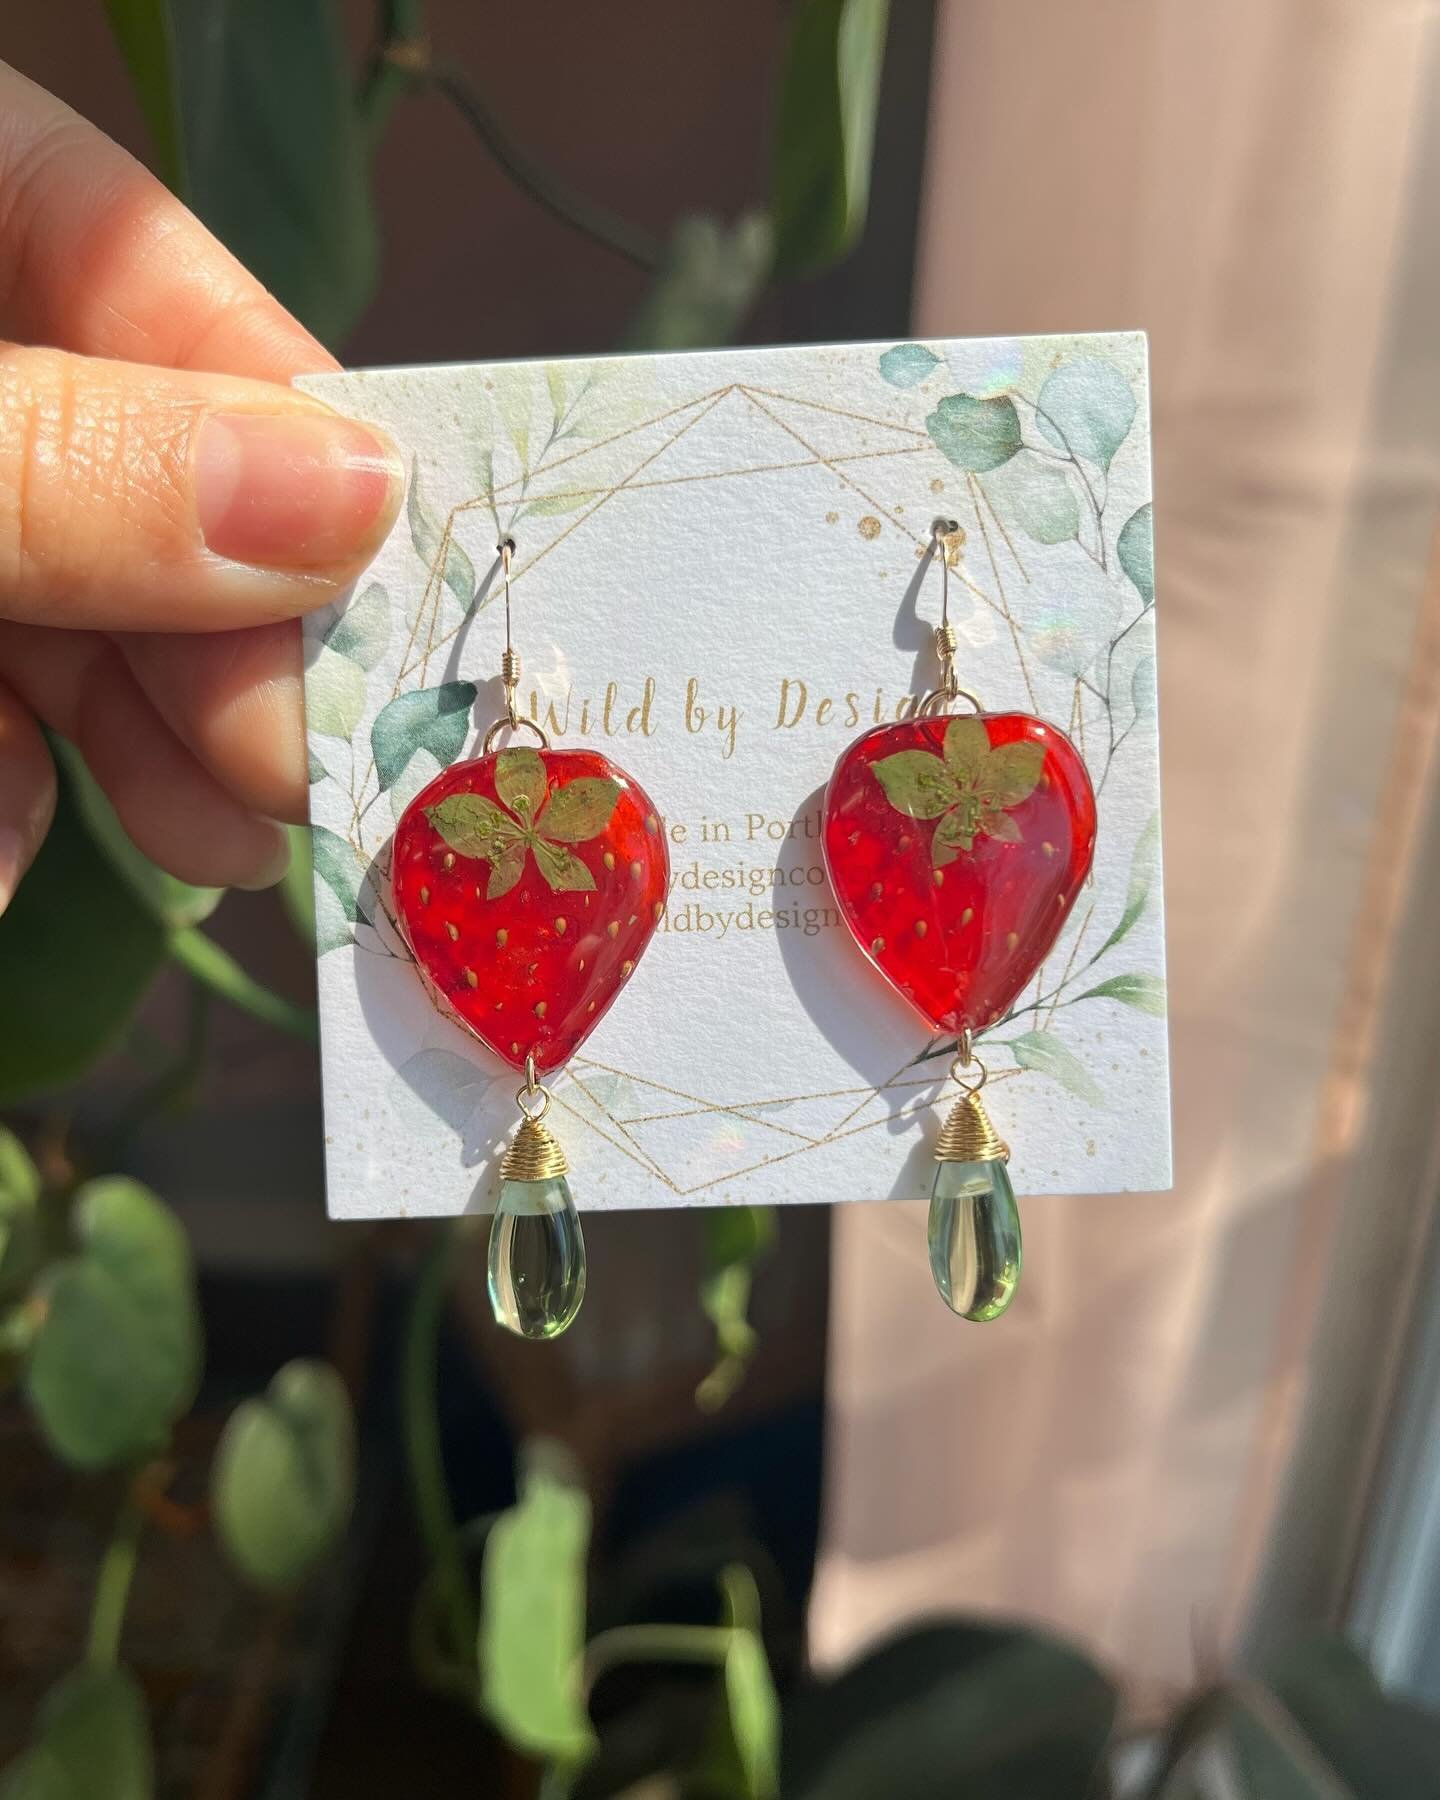 Which new real strawberry design is your favorite? 🍓 

#fruitjewelry #strawberry #strawberries #funearrings #botanicaljewelry #colorjewelry #statementjewelry #statementearrings